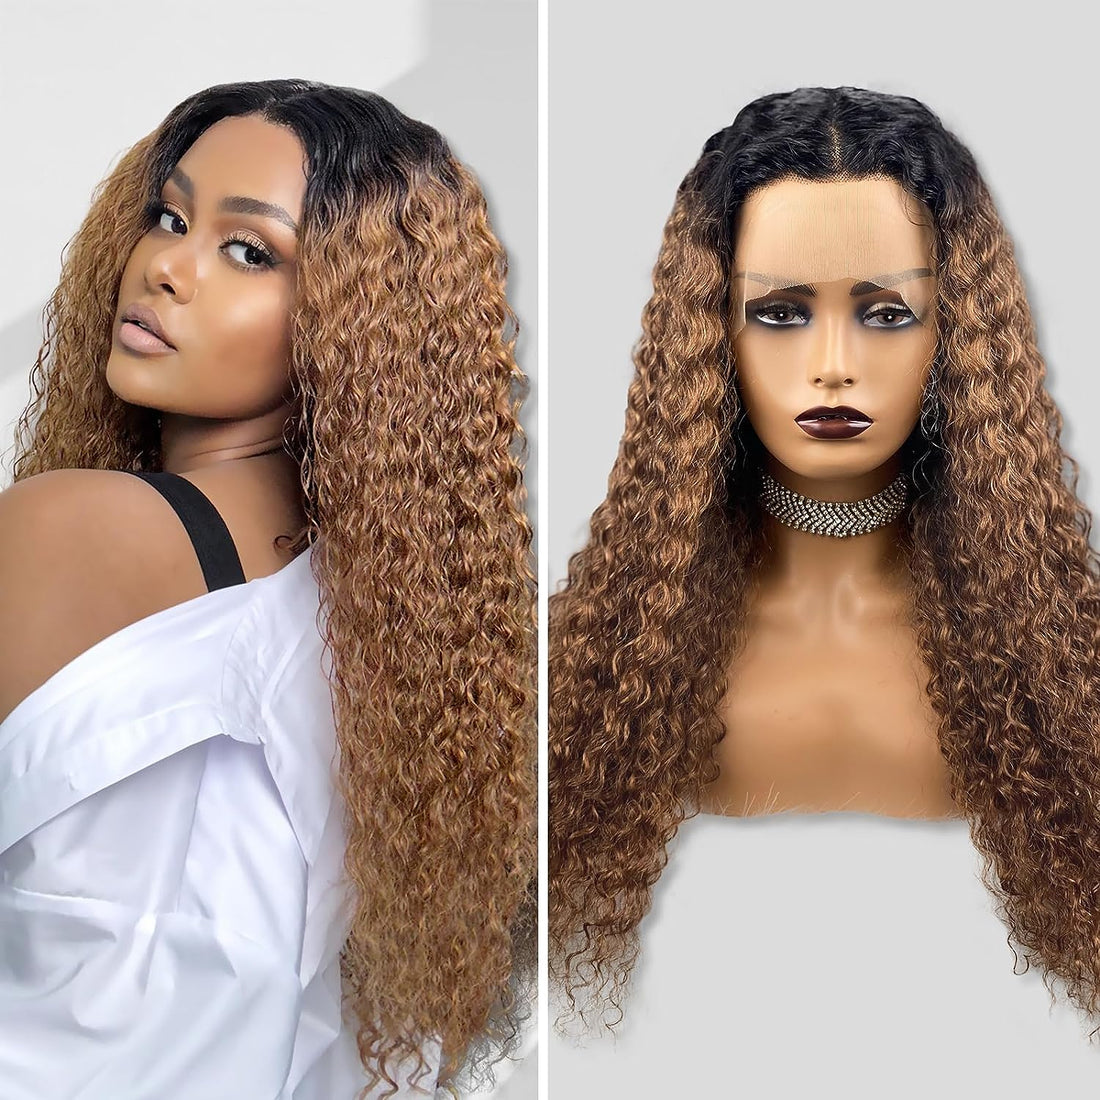 Wesface Ombre Brown Curly Brazilian Human Hair 4x4/13x4 Lace Wig Pre plucked Baby Hair Wigs for Black Women 180% Density